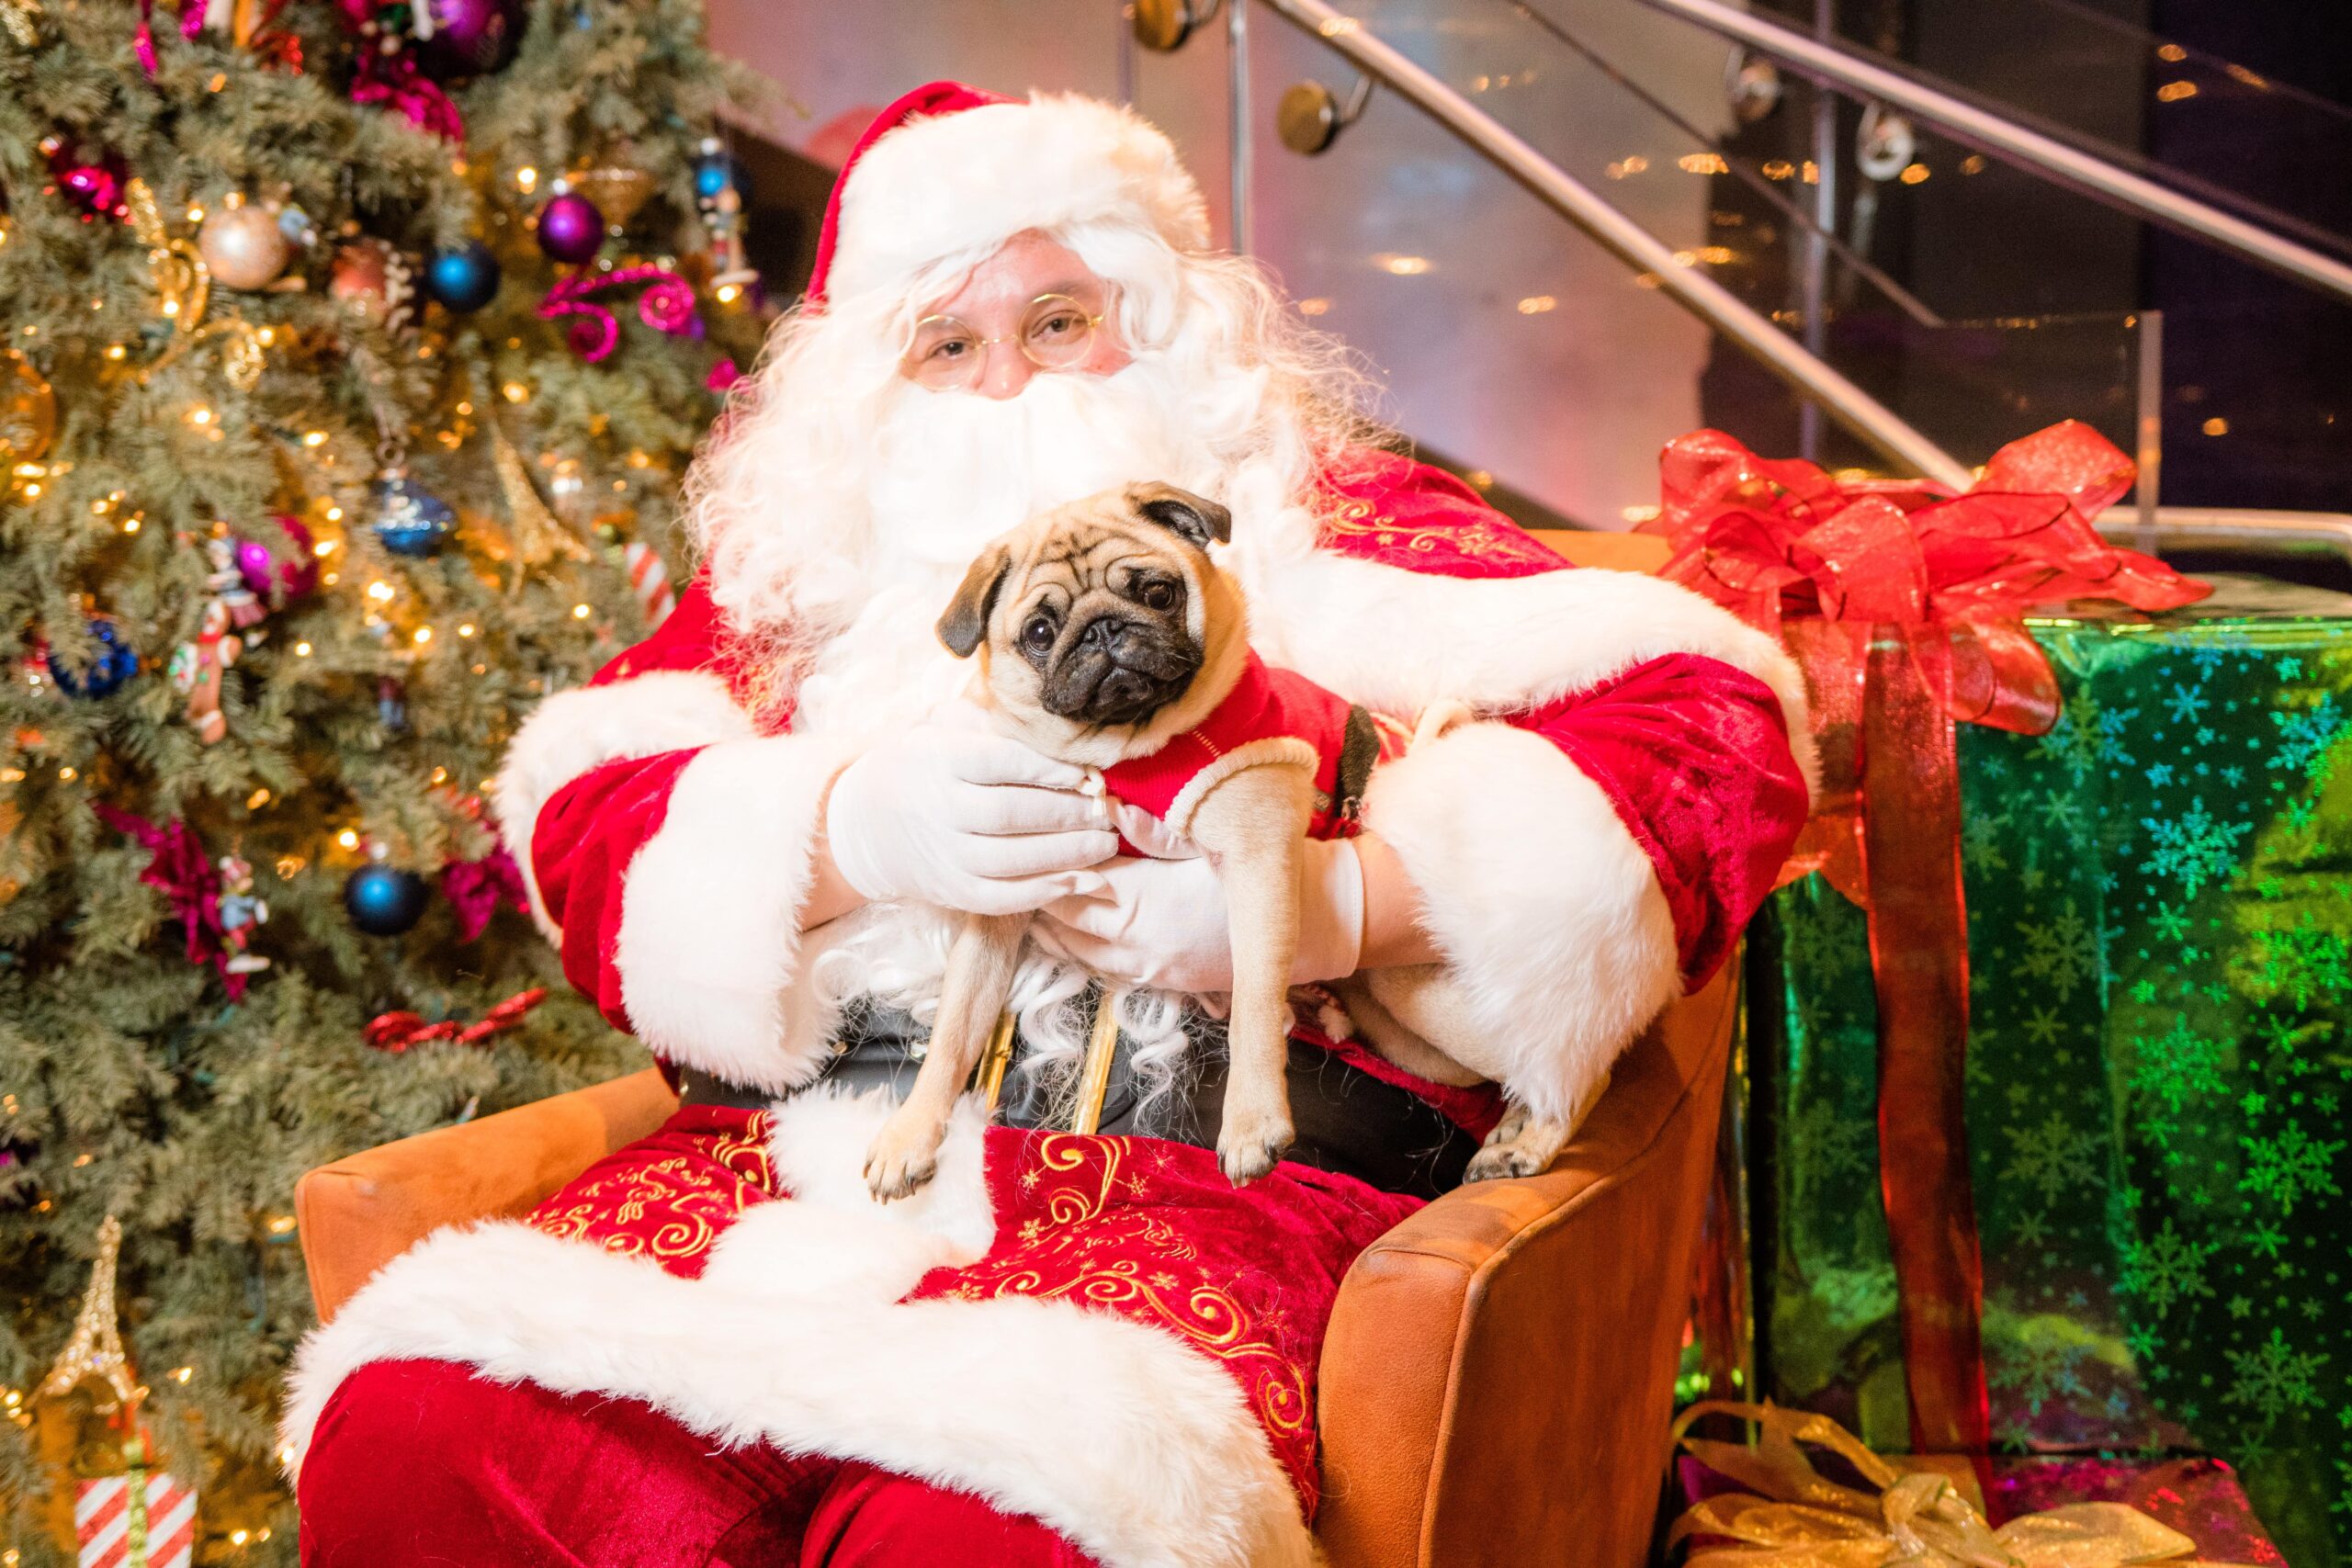 Bring your furry friend to The Sofitel Los Angeles at Beverly Hills to meet Santa! Photo Credit: The Sofitel Los Angeles at Beverly Hills